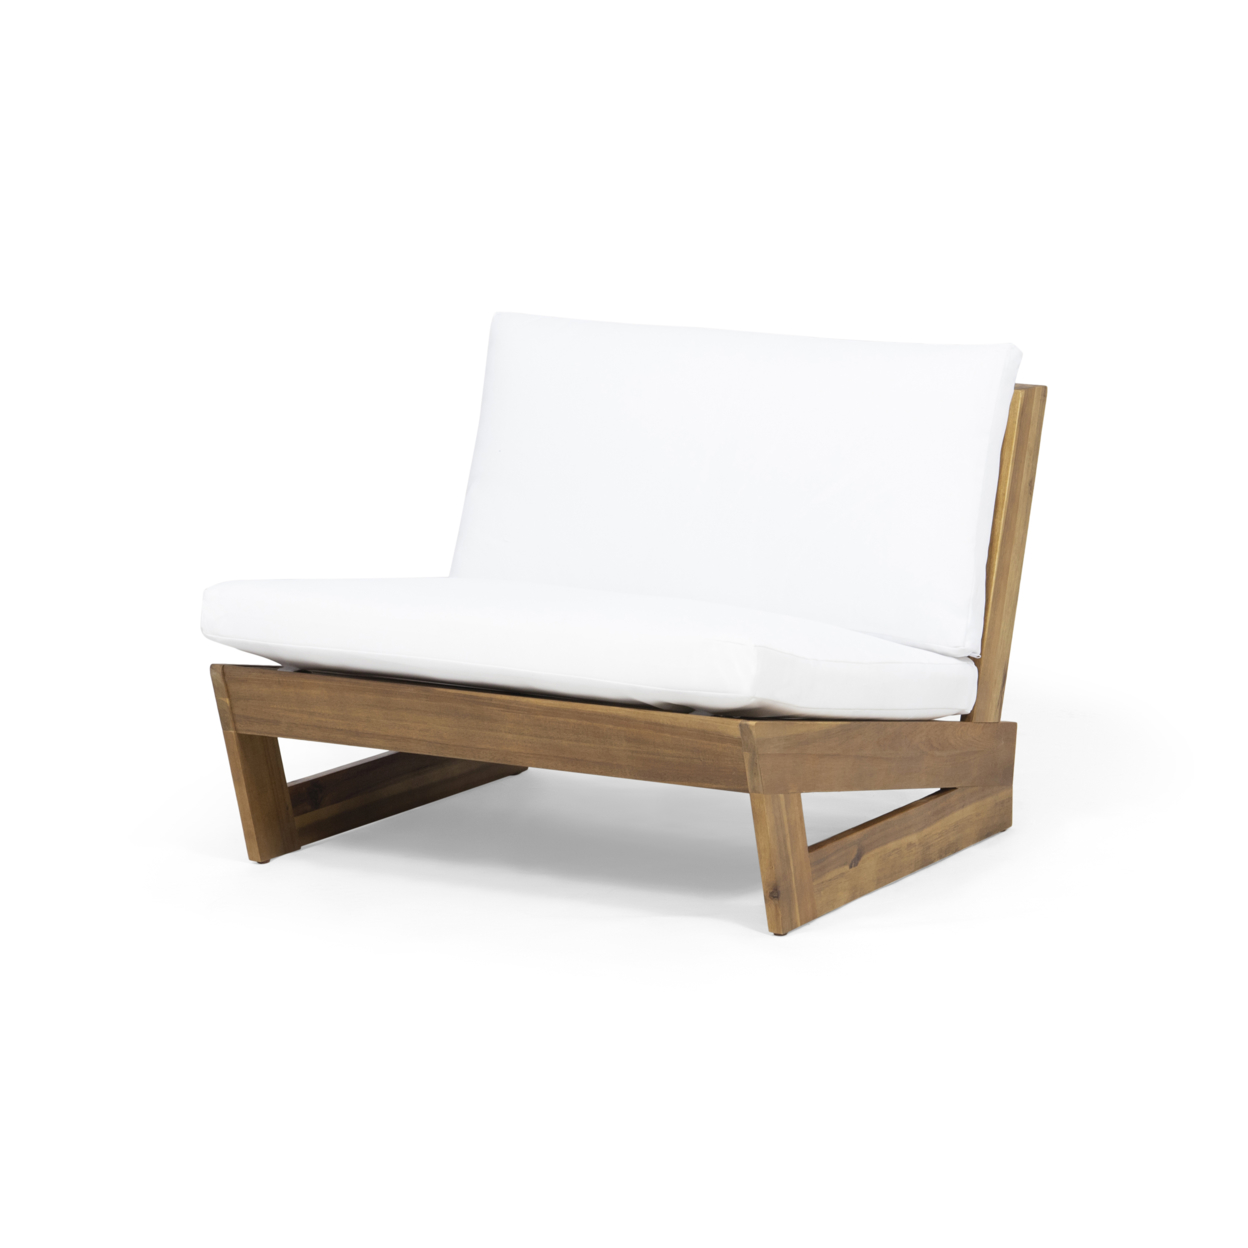 Emma Outdoor Acacia Wood Club Chairs With Cushions (Set Of 2) - Teak Finish, White